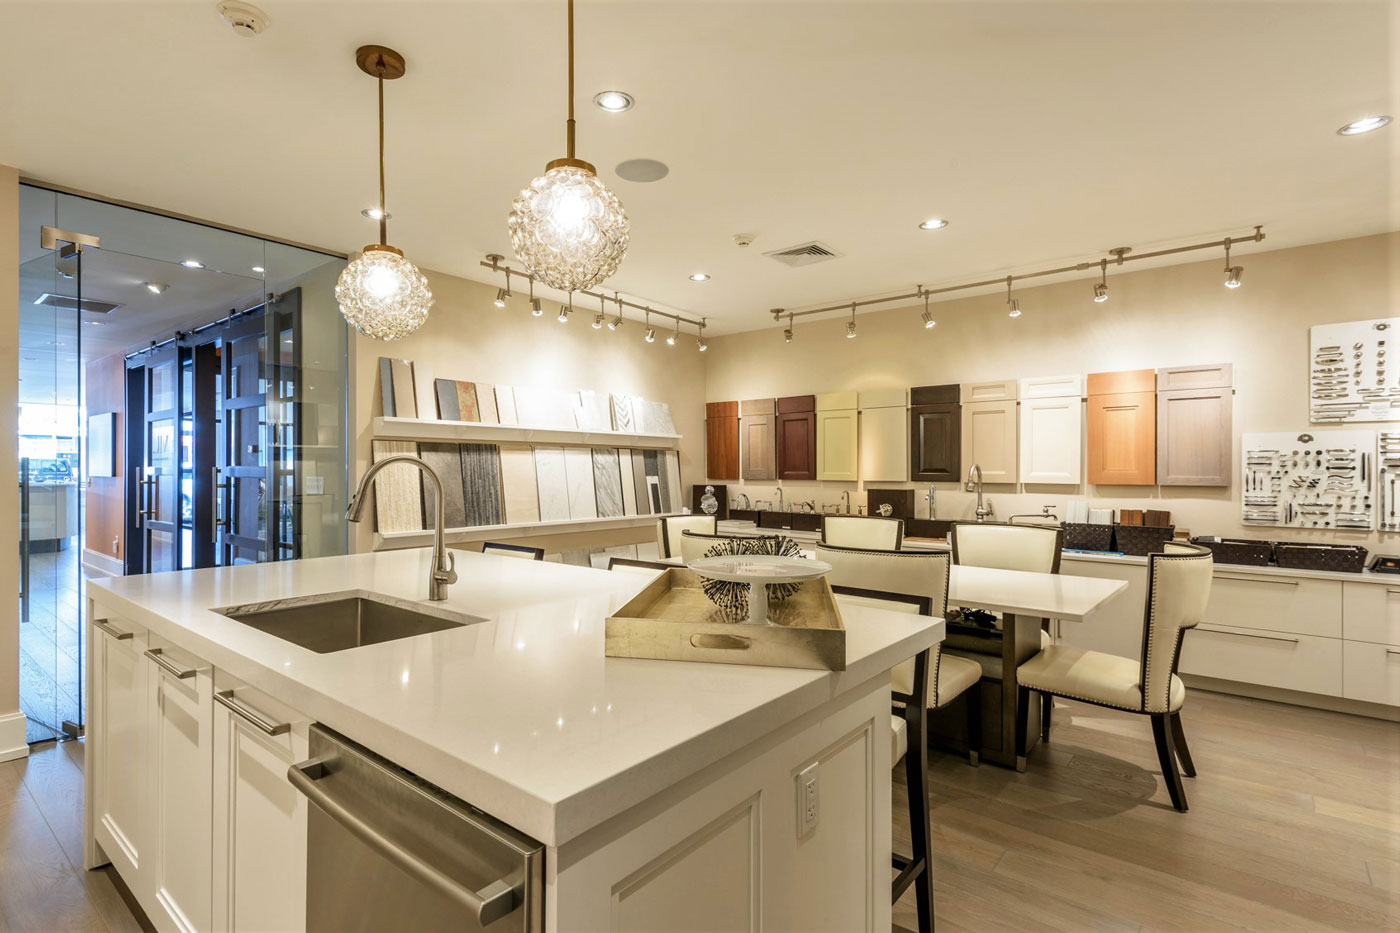 Design center showcasing modern interior design and merchandising cabinetry, countertop and finishes in New York.